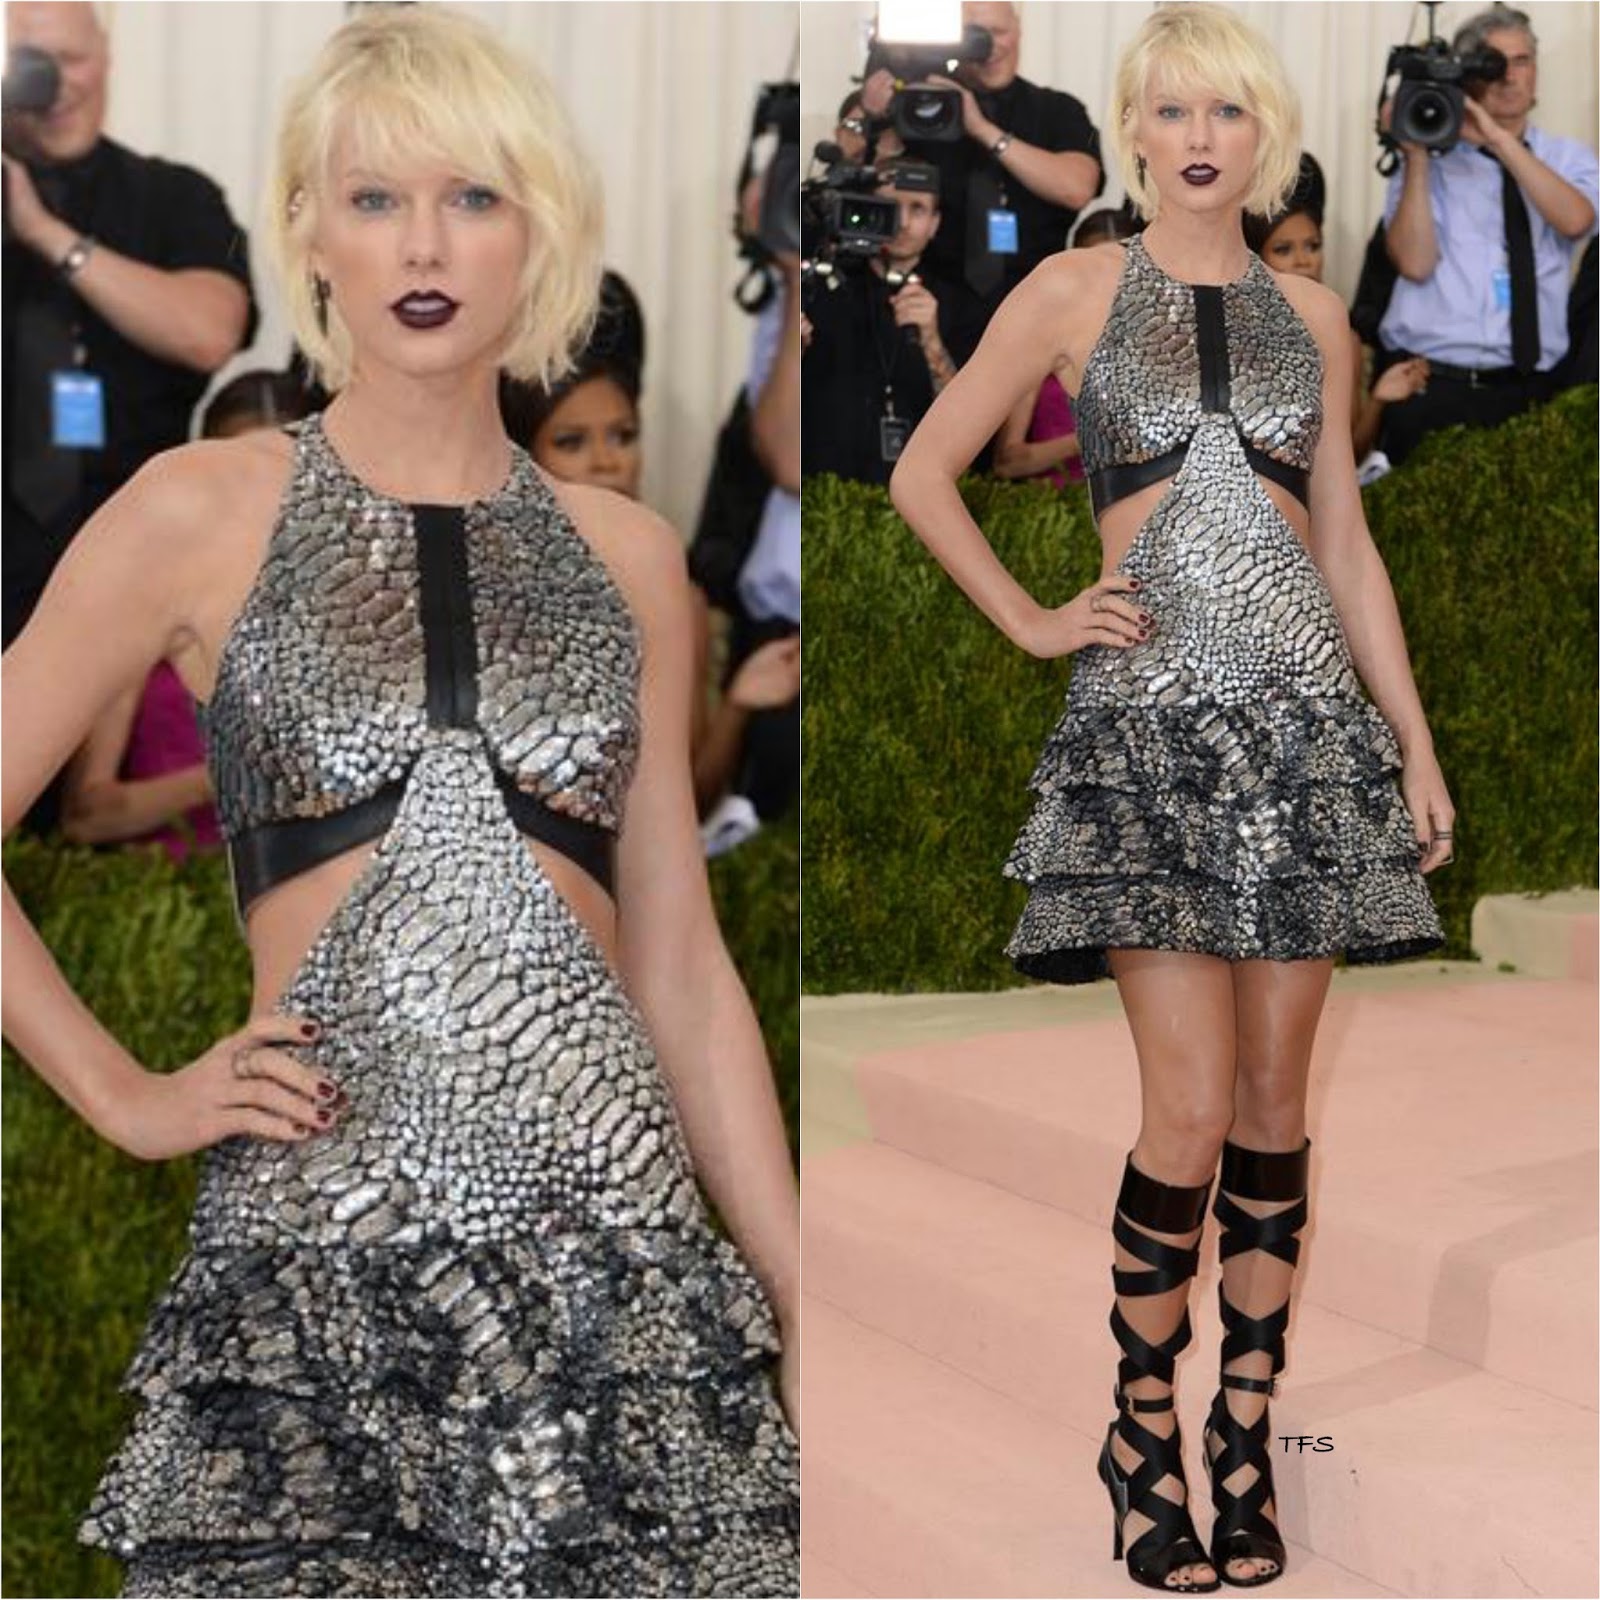 Taylor Swift Rocks Edgy Louis Vuitton Look at Met Gala 2016!, 2016 Met Gala,  Met Gala, Taylor Swift